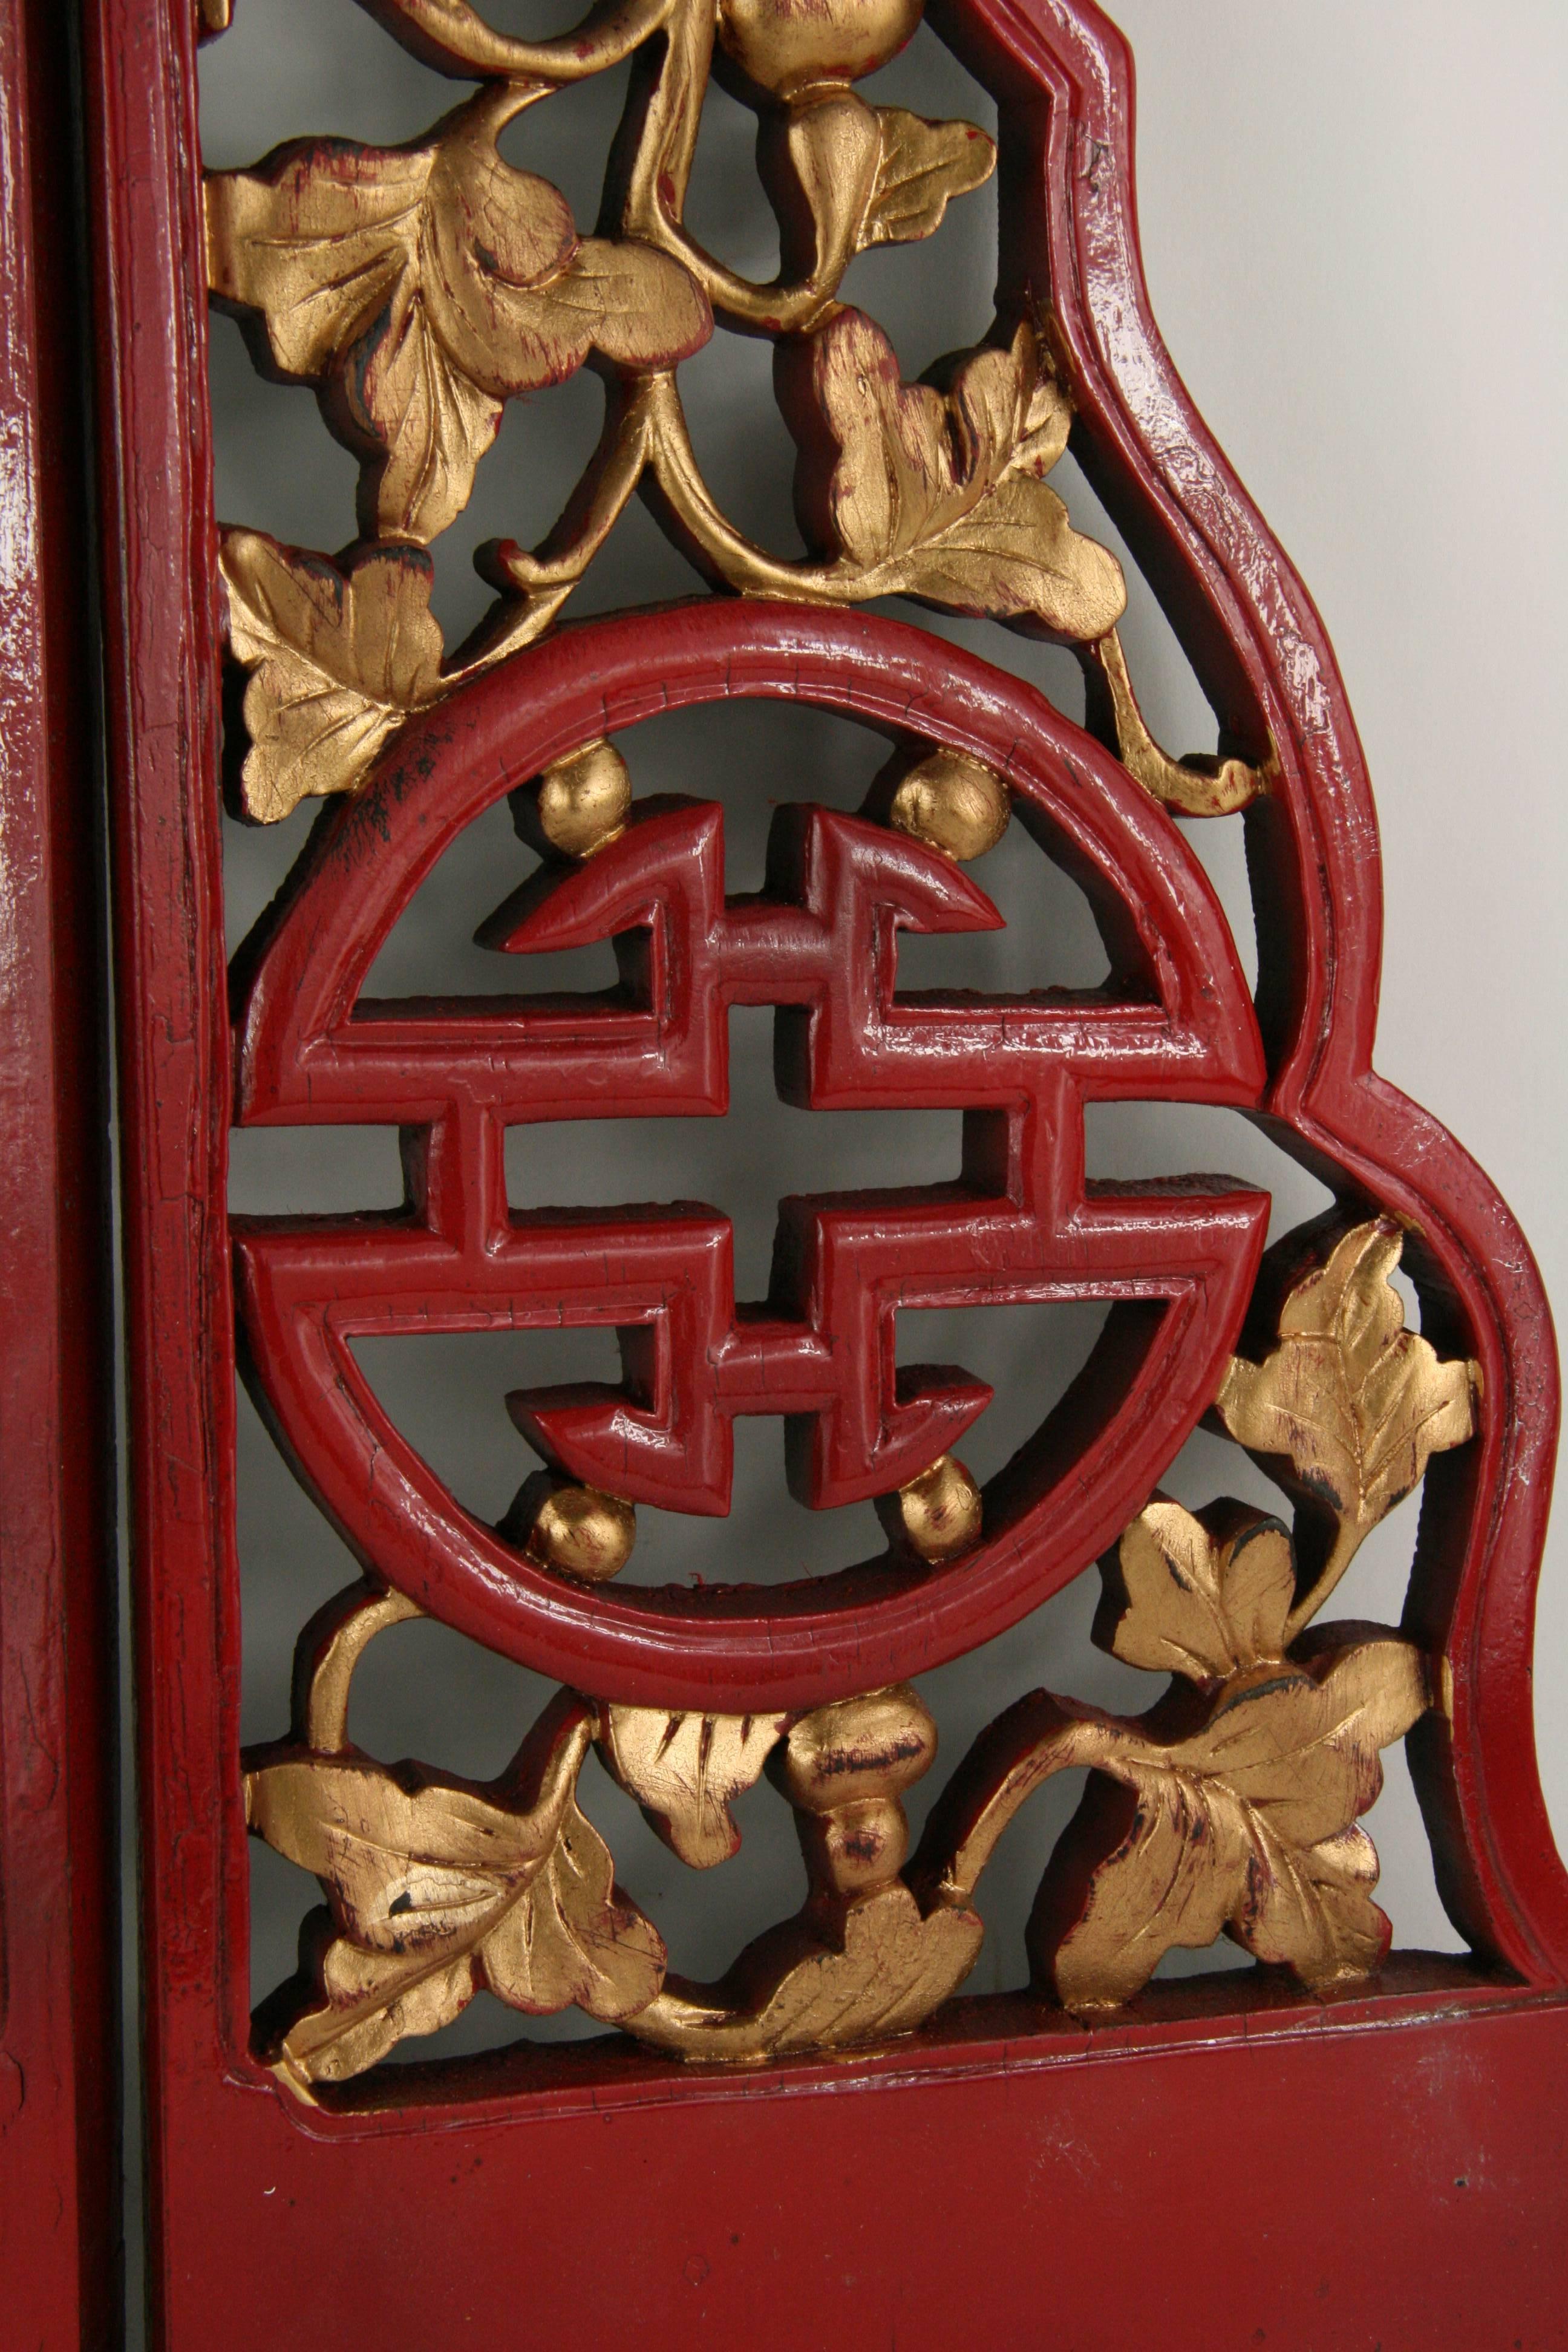 9-309 pair of antique Chinese intricately hand-carved wood panels with red and gilt finish.
Each panel measures: 25.5